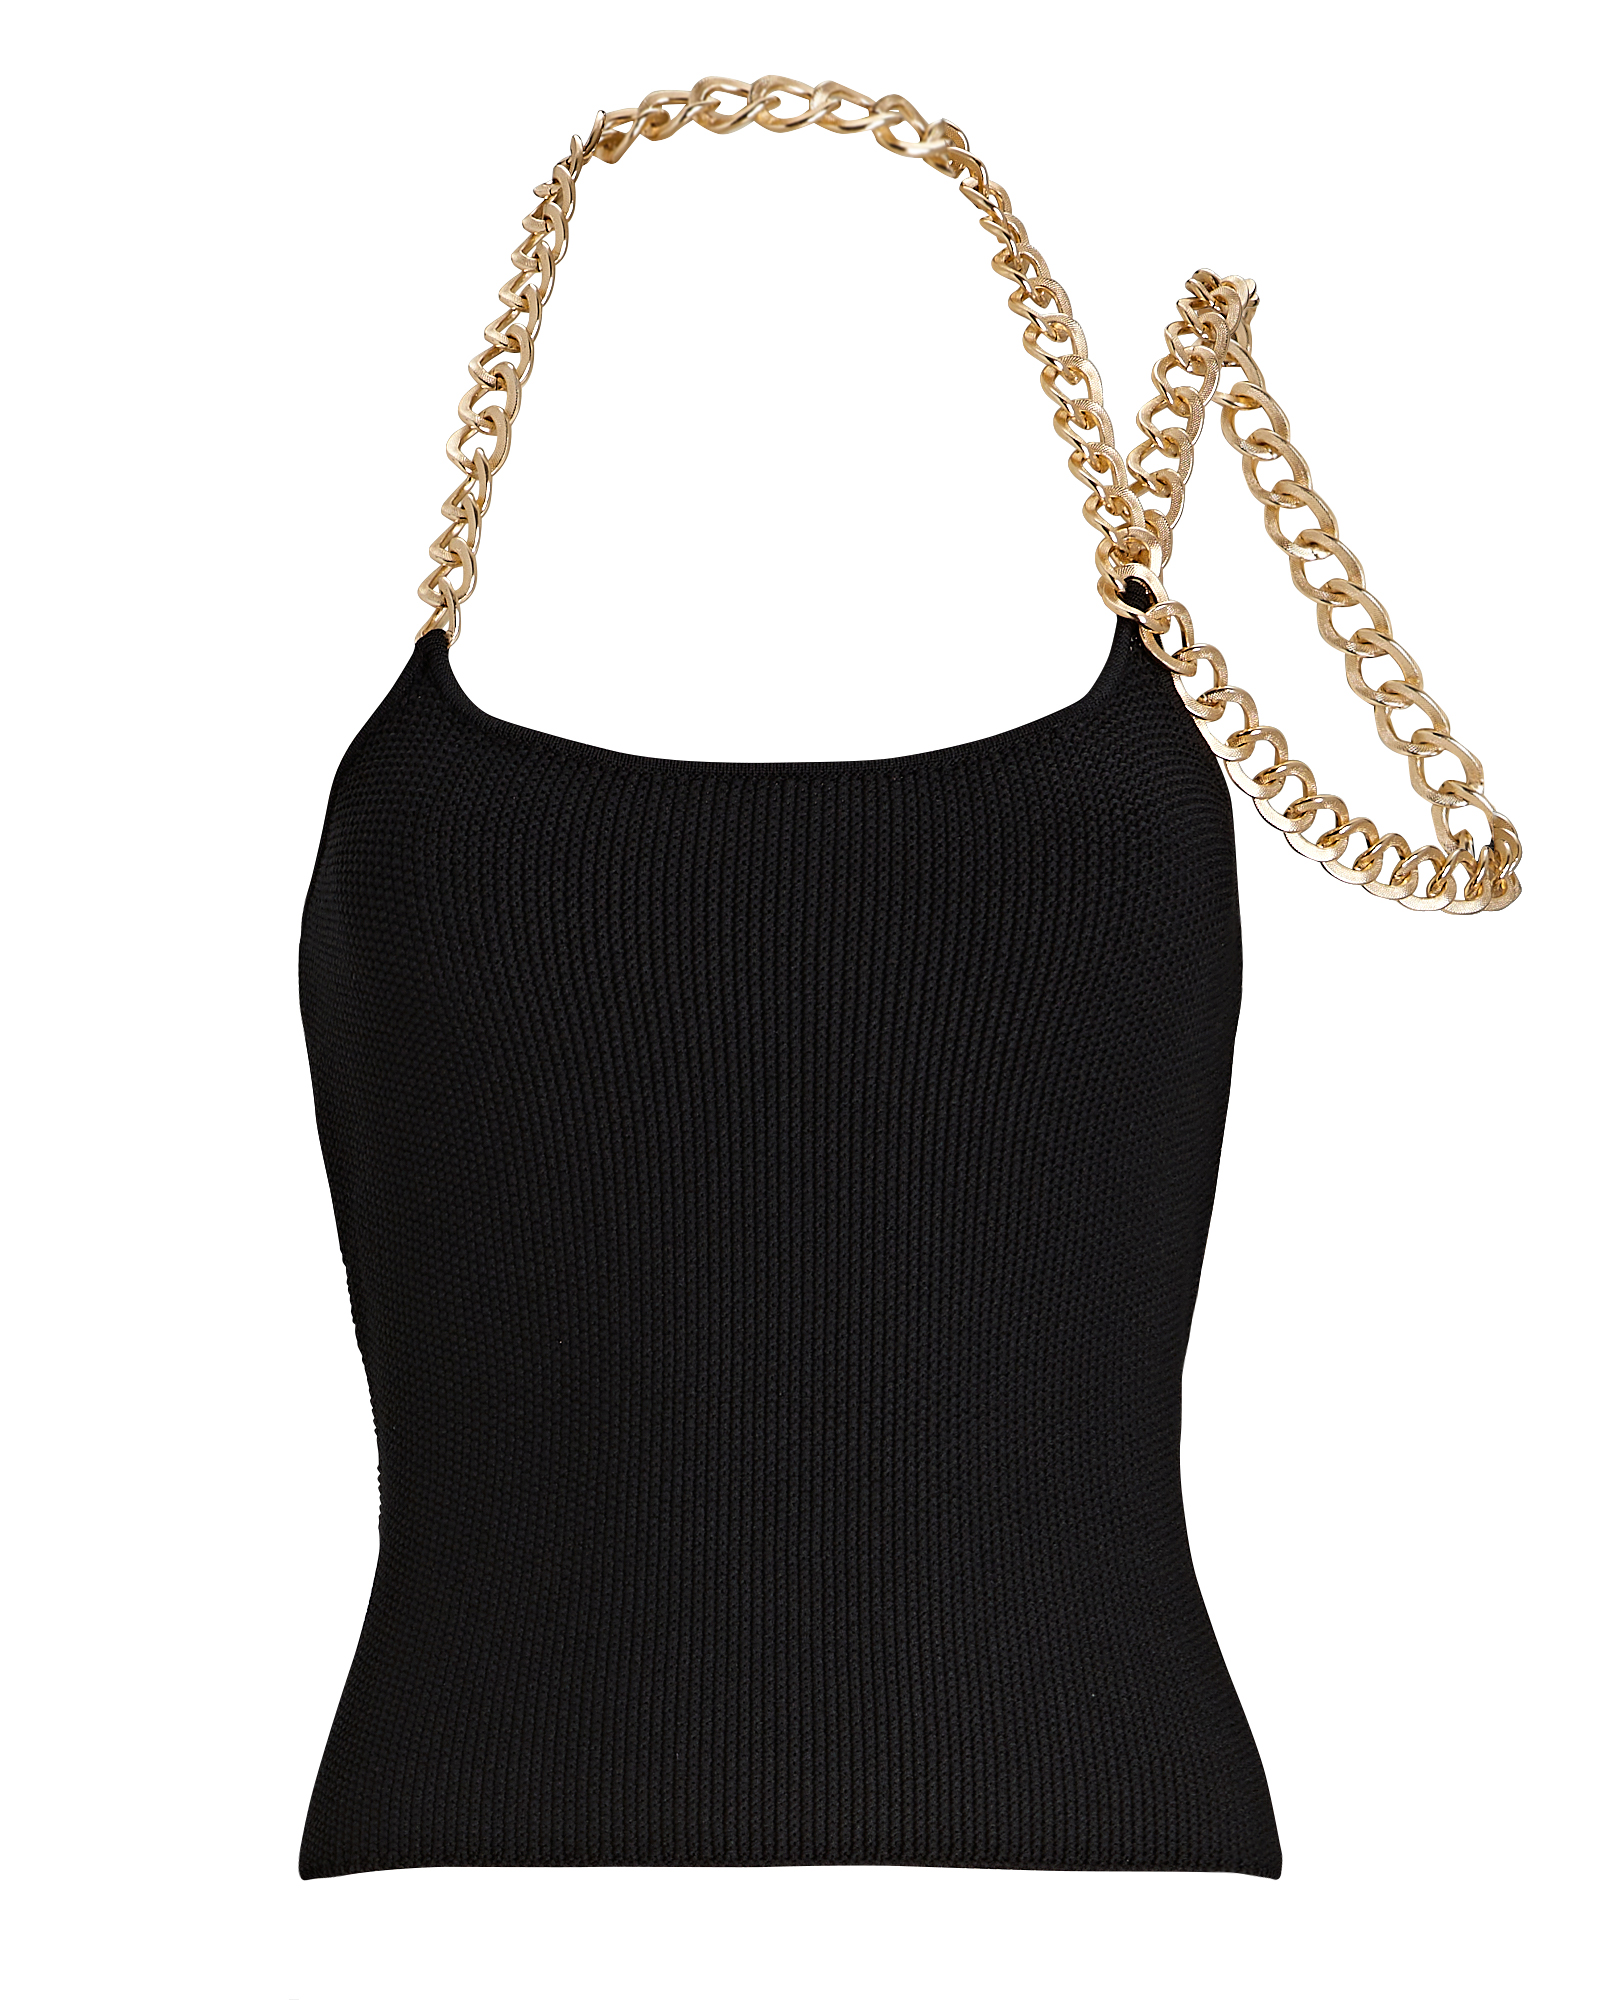 The Sei Chain-Embellished Knit Top | INTERMIX®